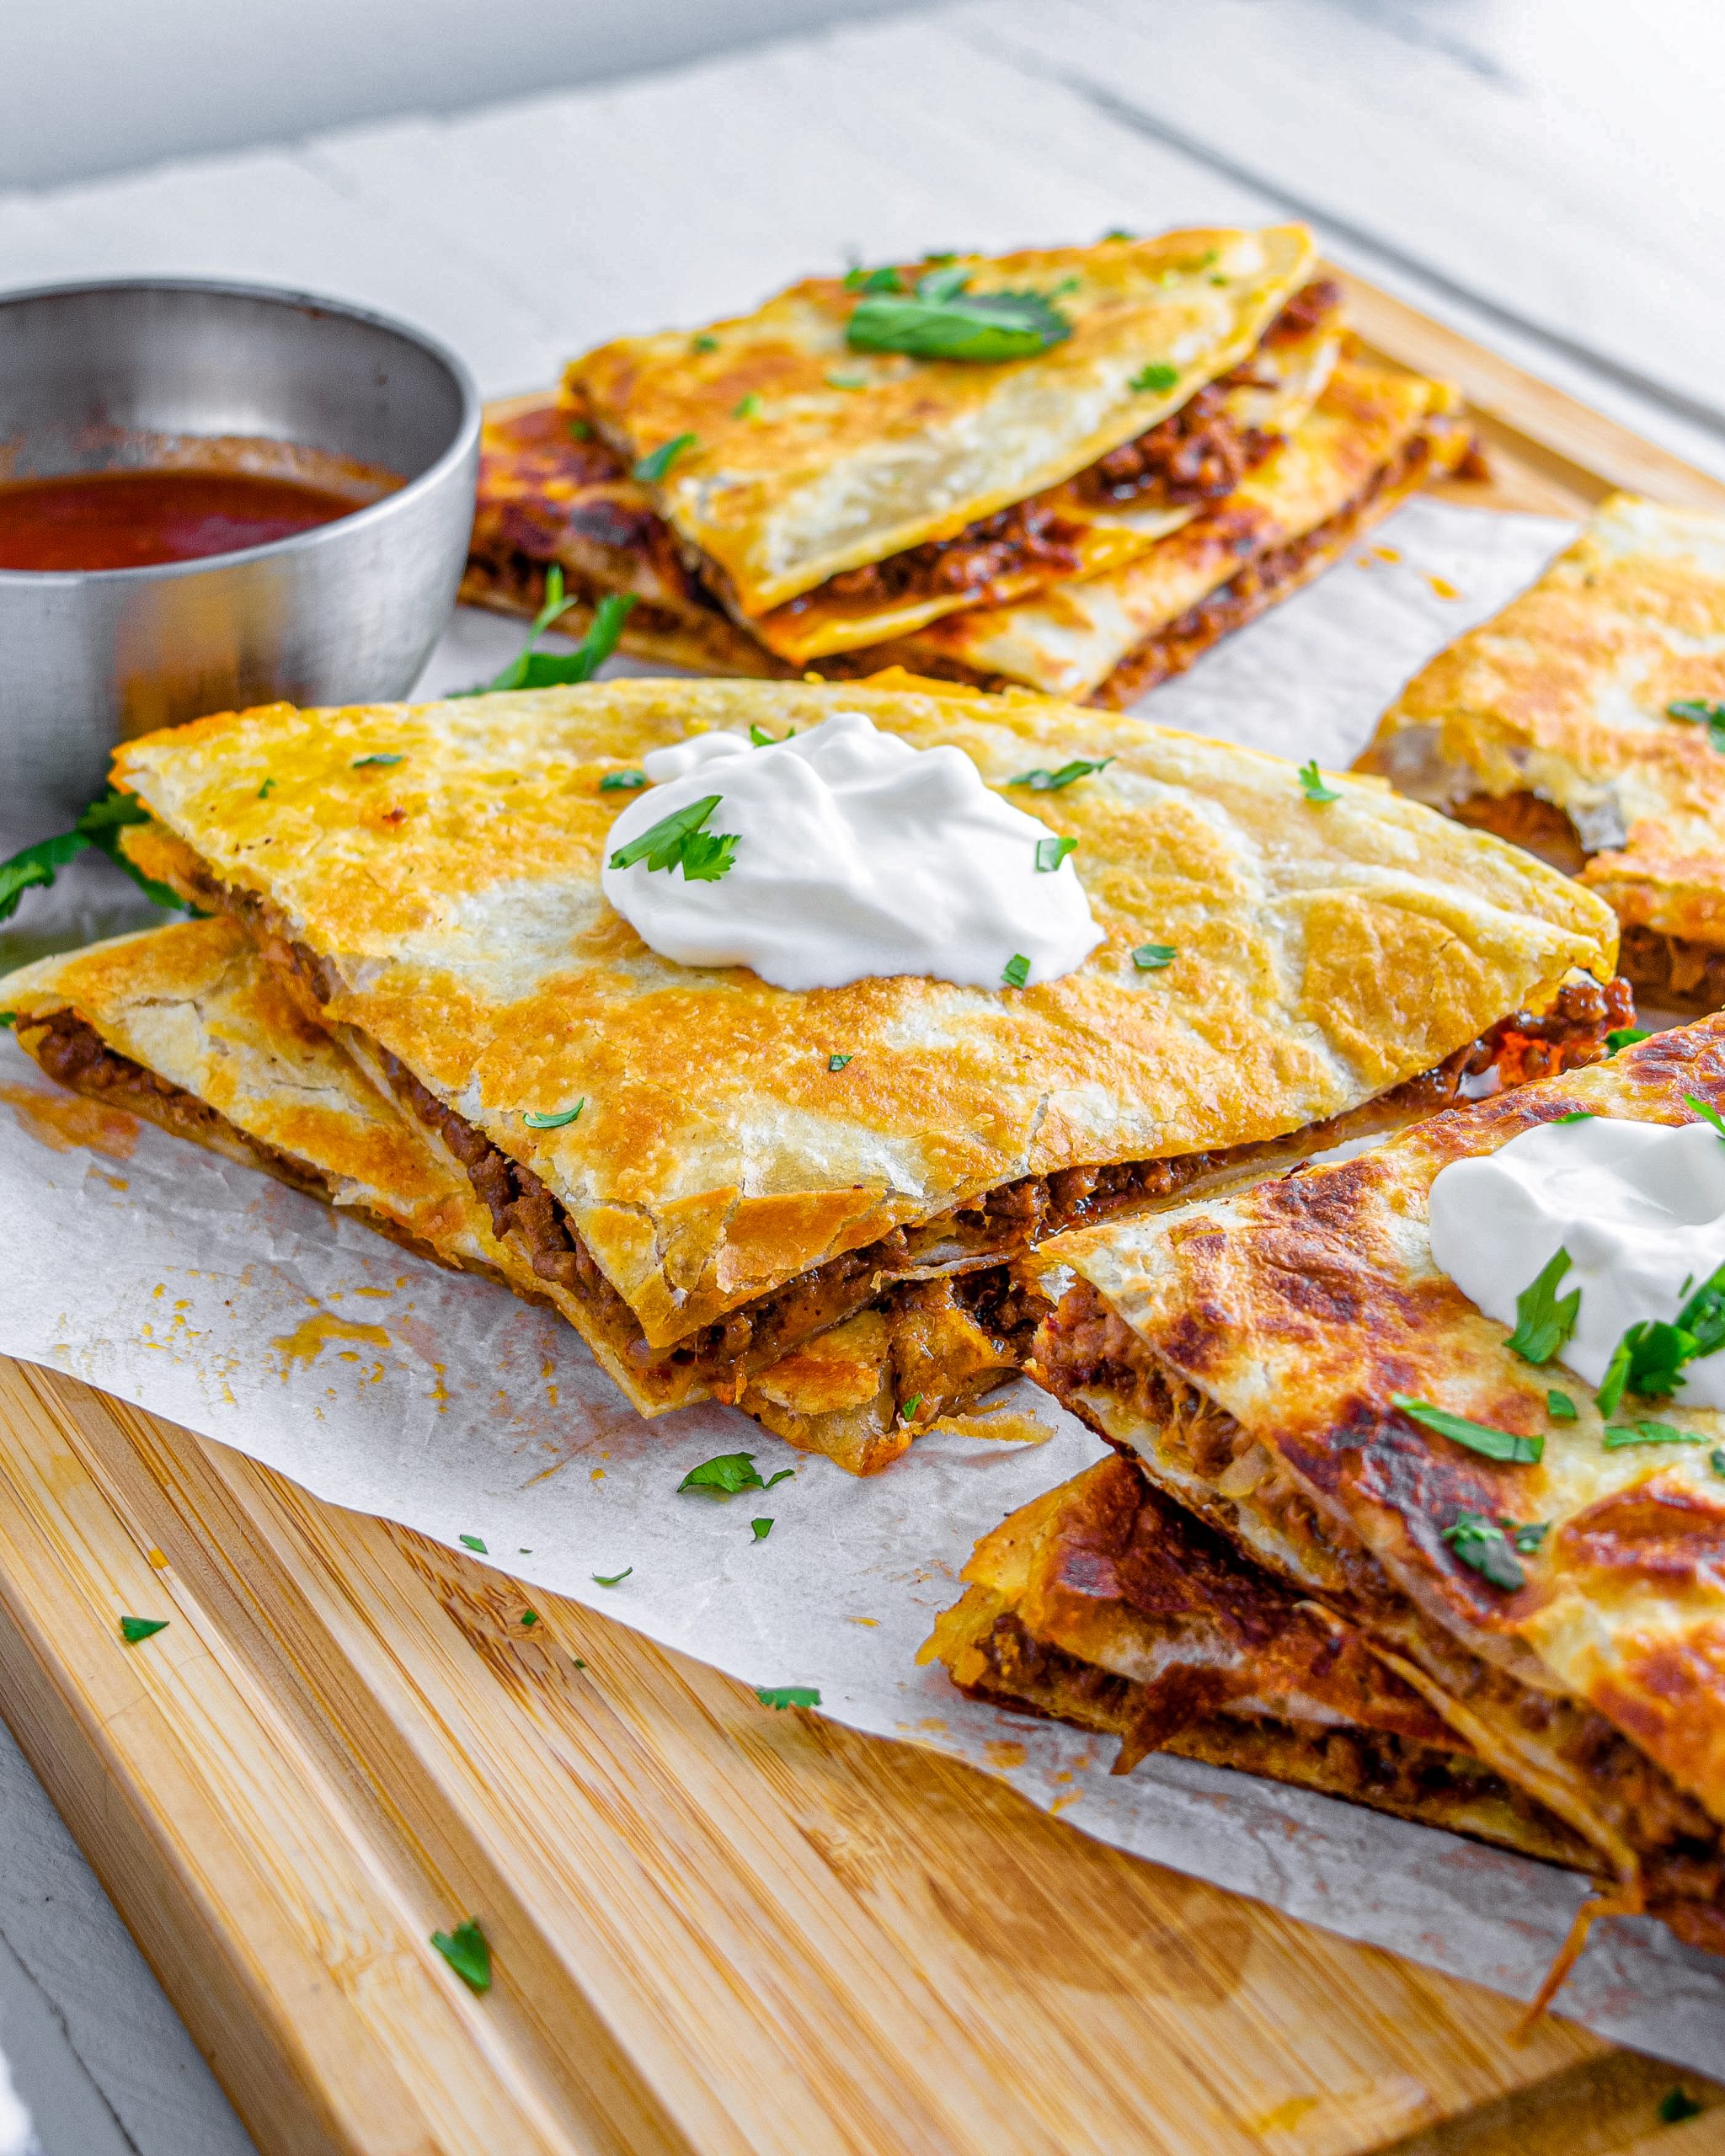 Beef and Cheese Quesadilla
